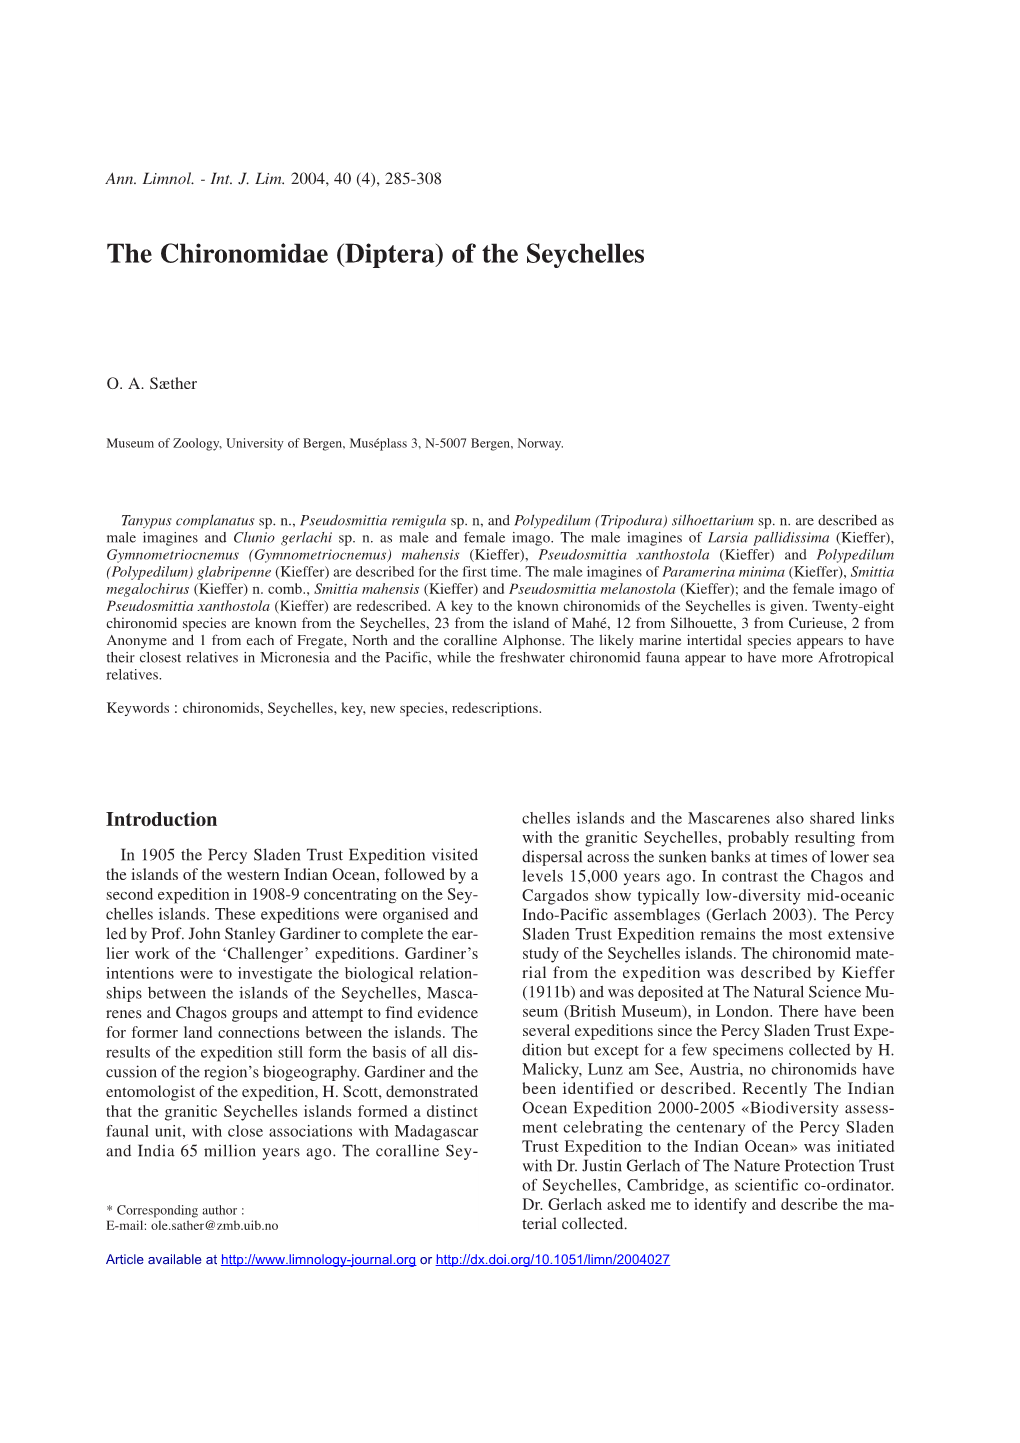 The Chironomidae (Diptera) of the Seychelles